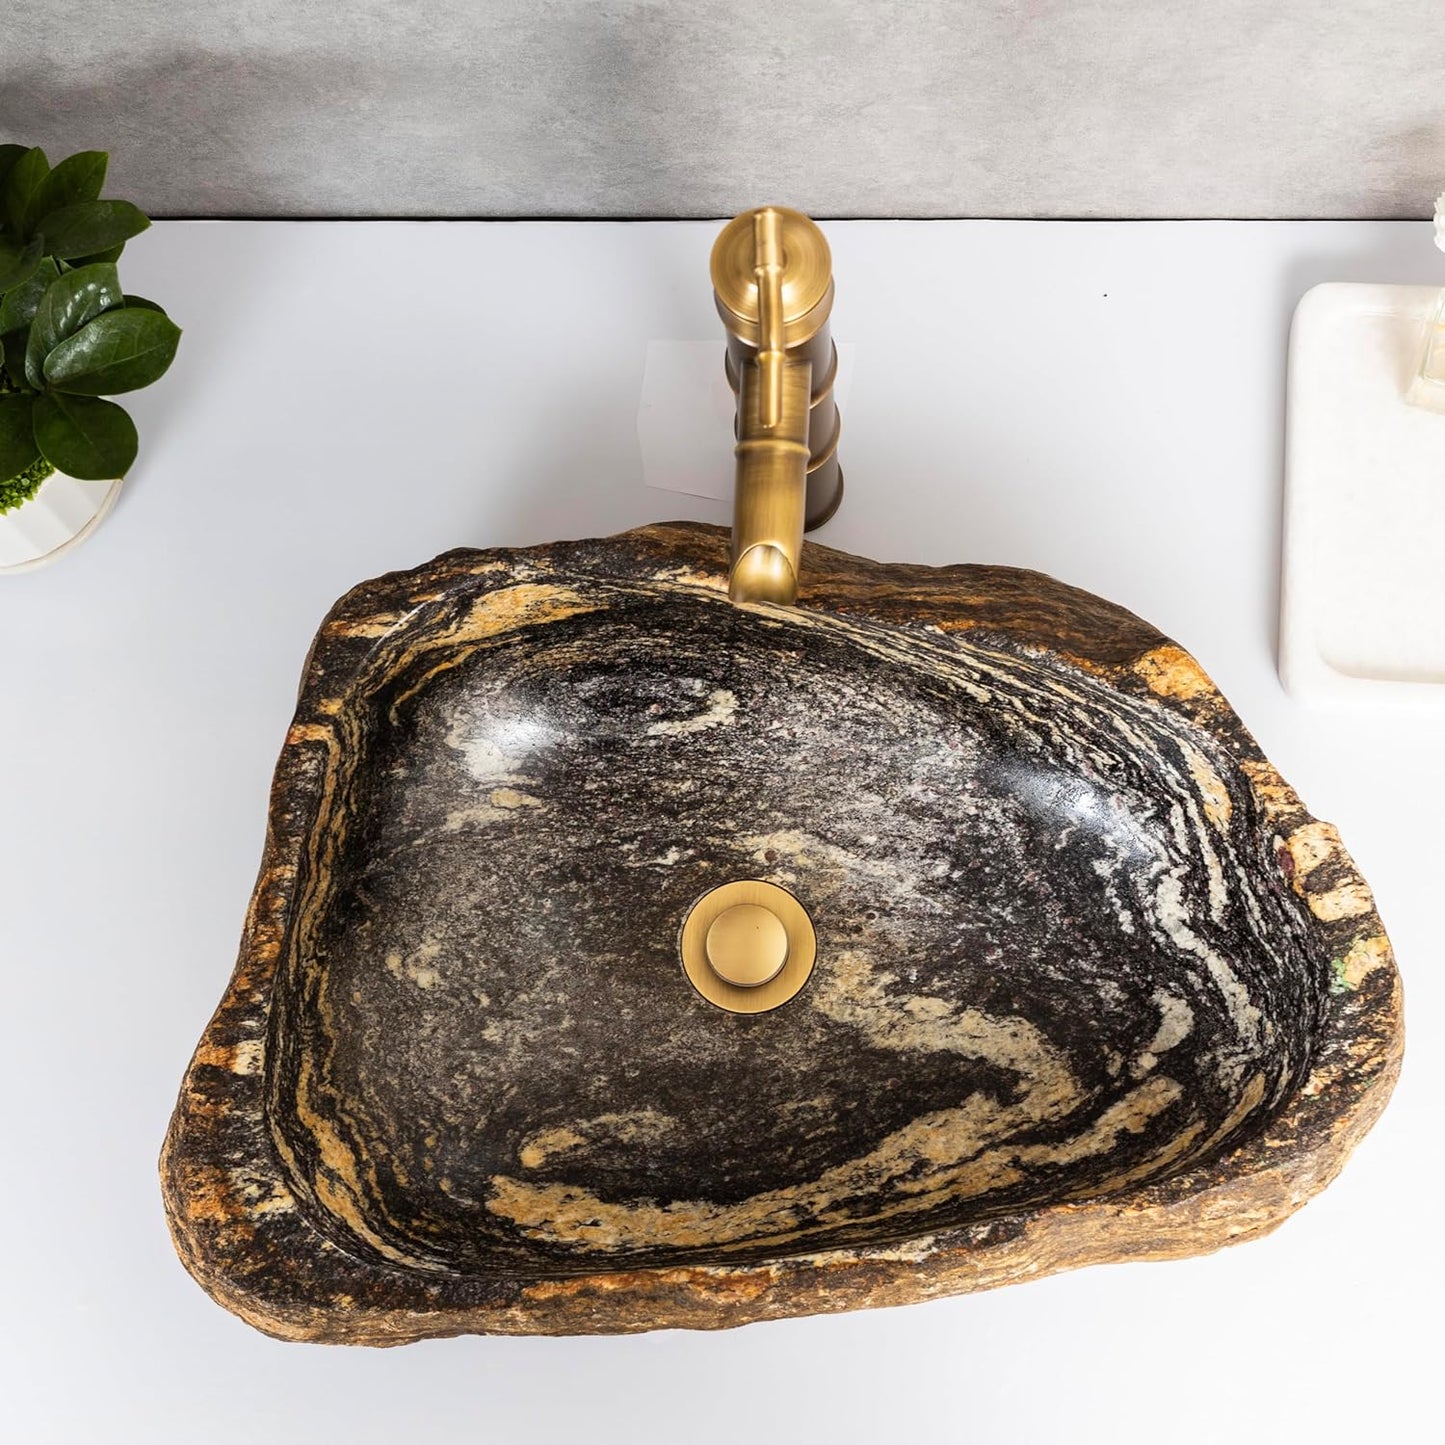 MIDUSO A+ Grade Irregular Natural River Stone Vessel Sink, Stone Vessel Sinks for Bathrooms, Vessel Sink Stone, Bathroom Vessel Sink Included Copper Pop-up Drain and P Trap Bathroom Sink